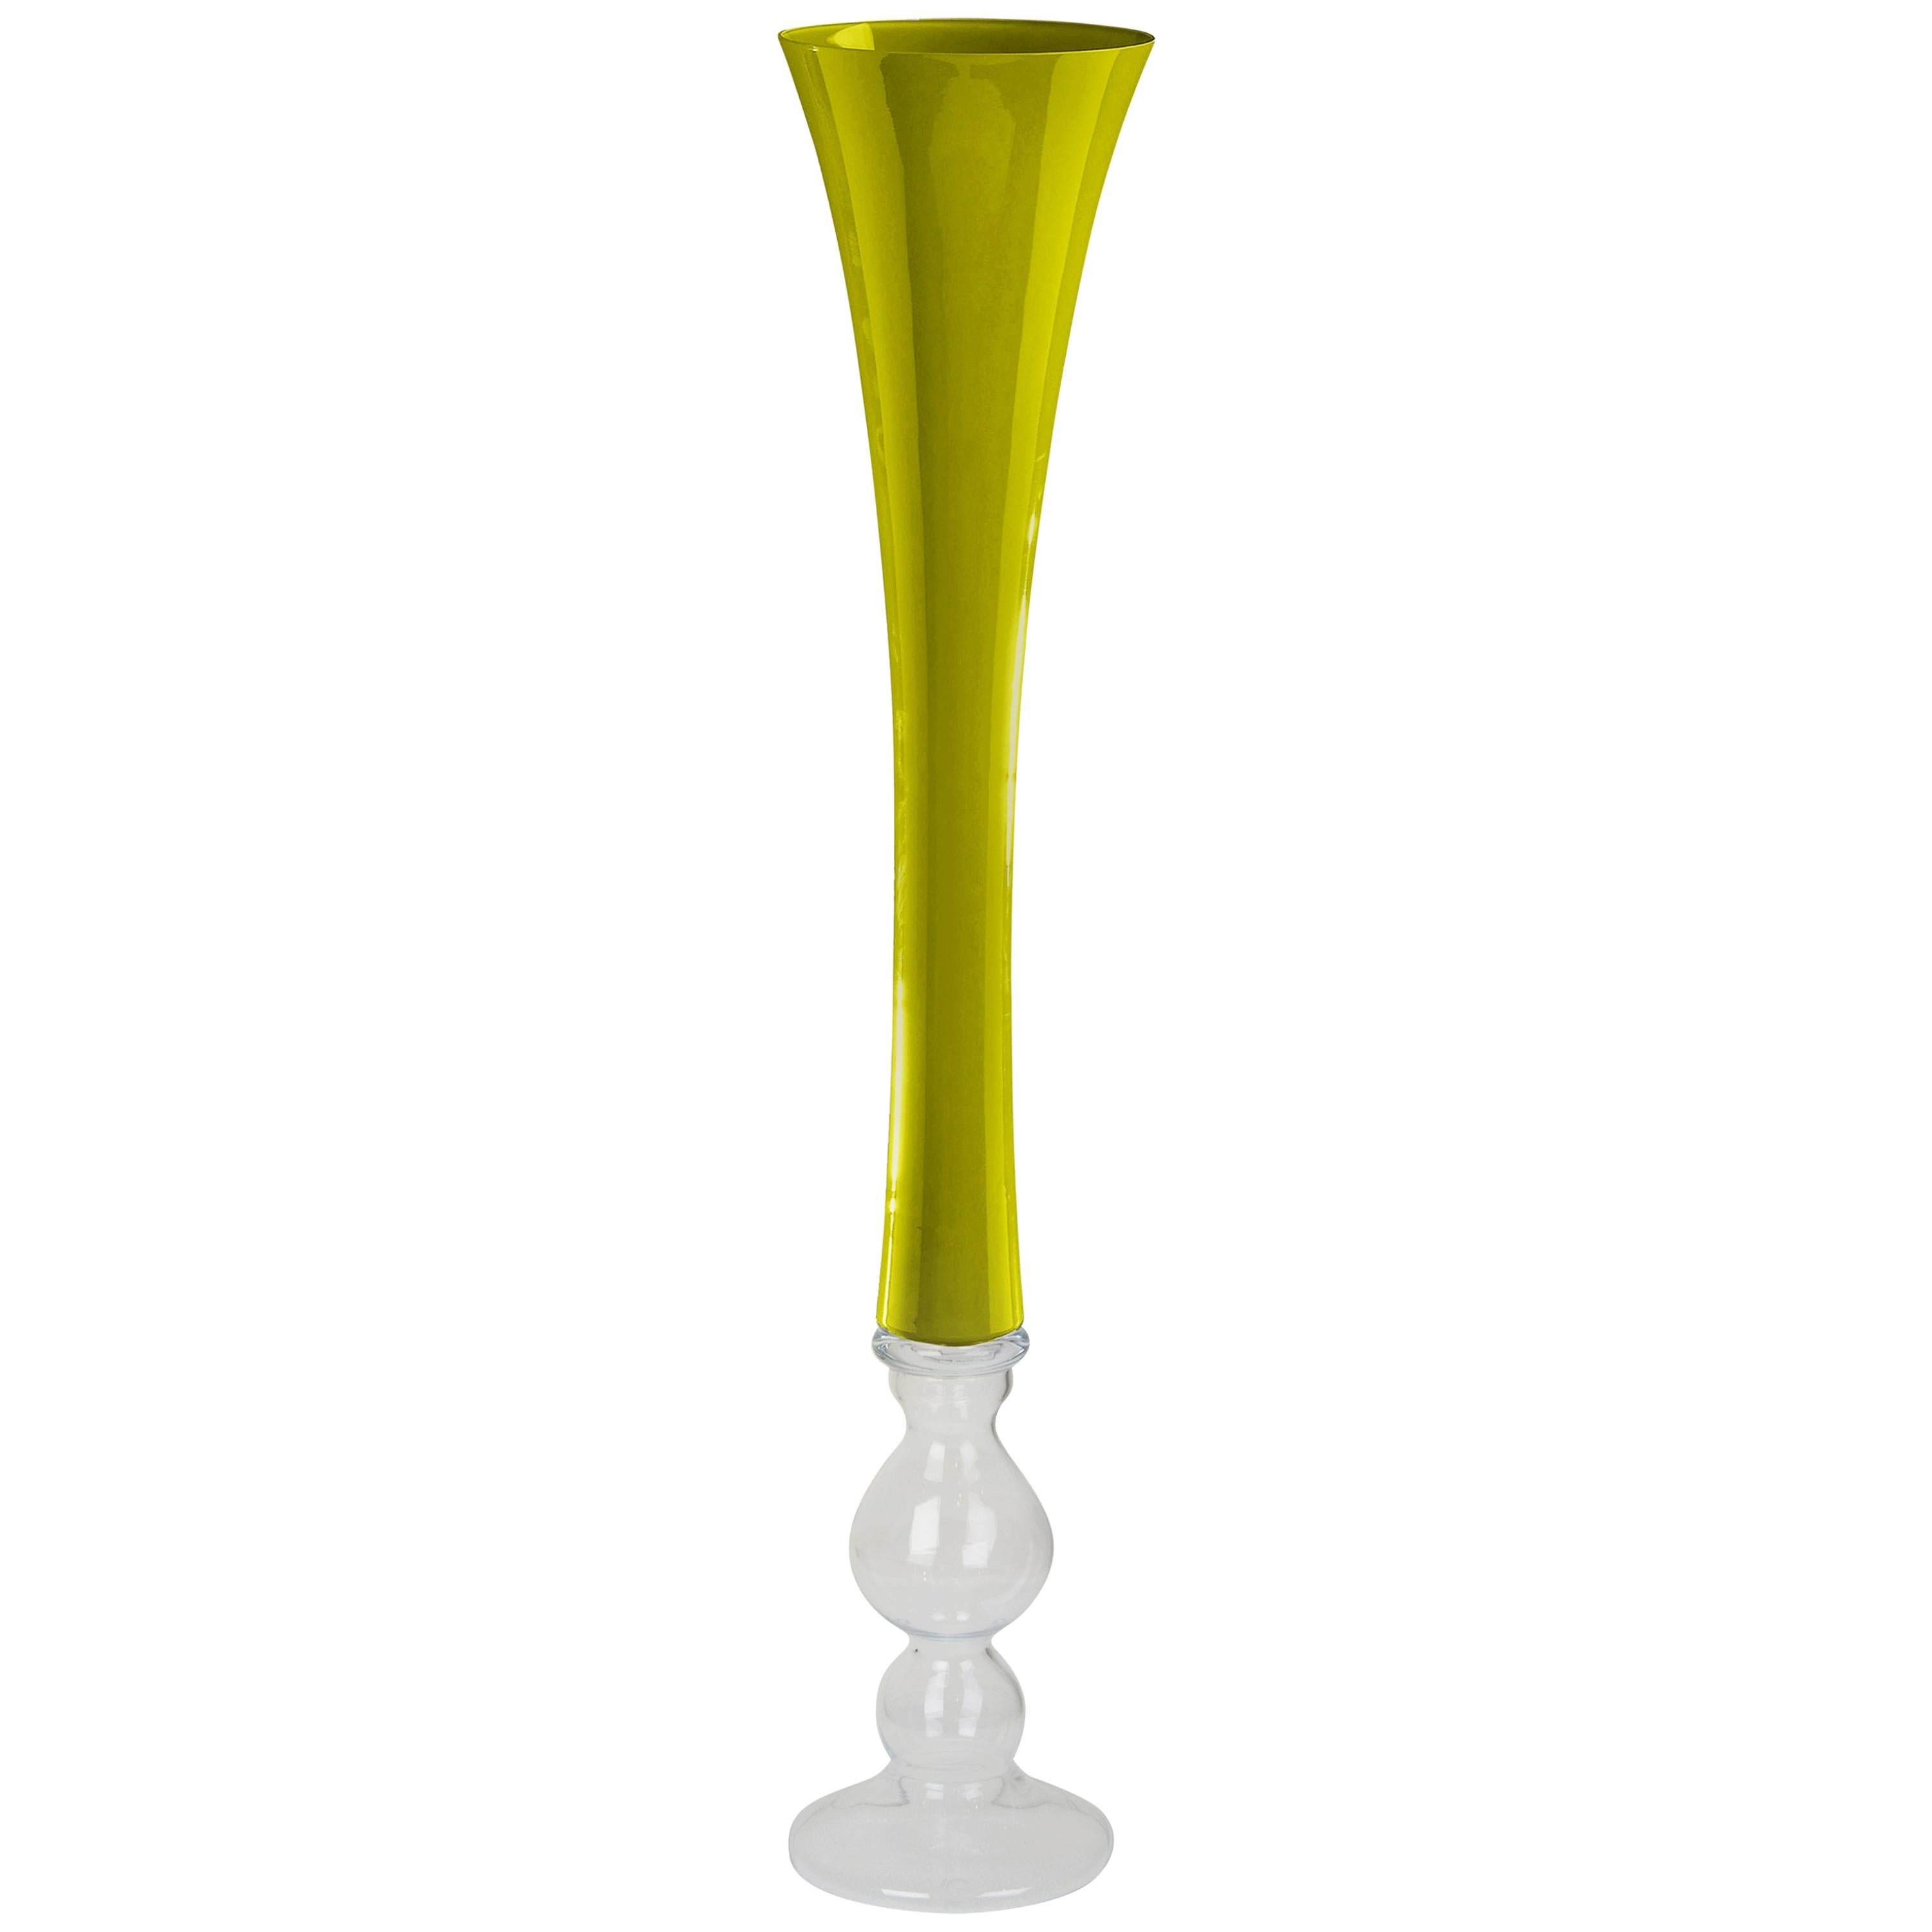 Vase Annalisa, Apple Green and Clear Color, in Glass, Italy